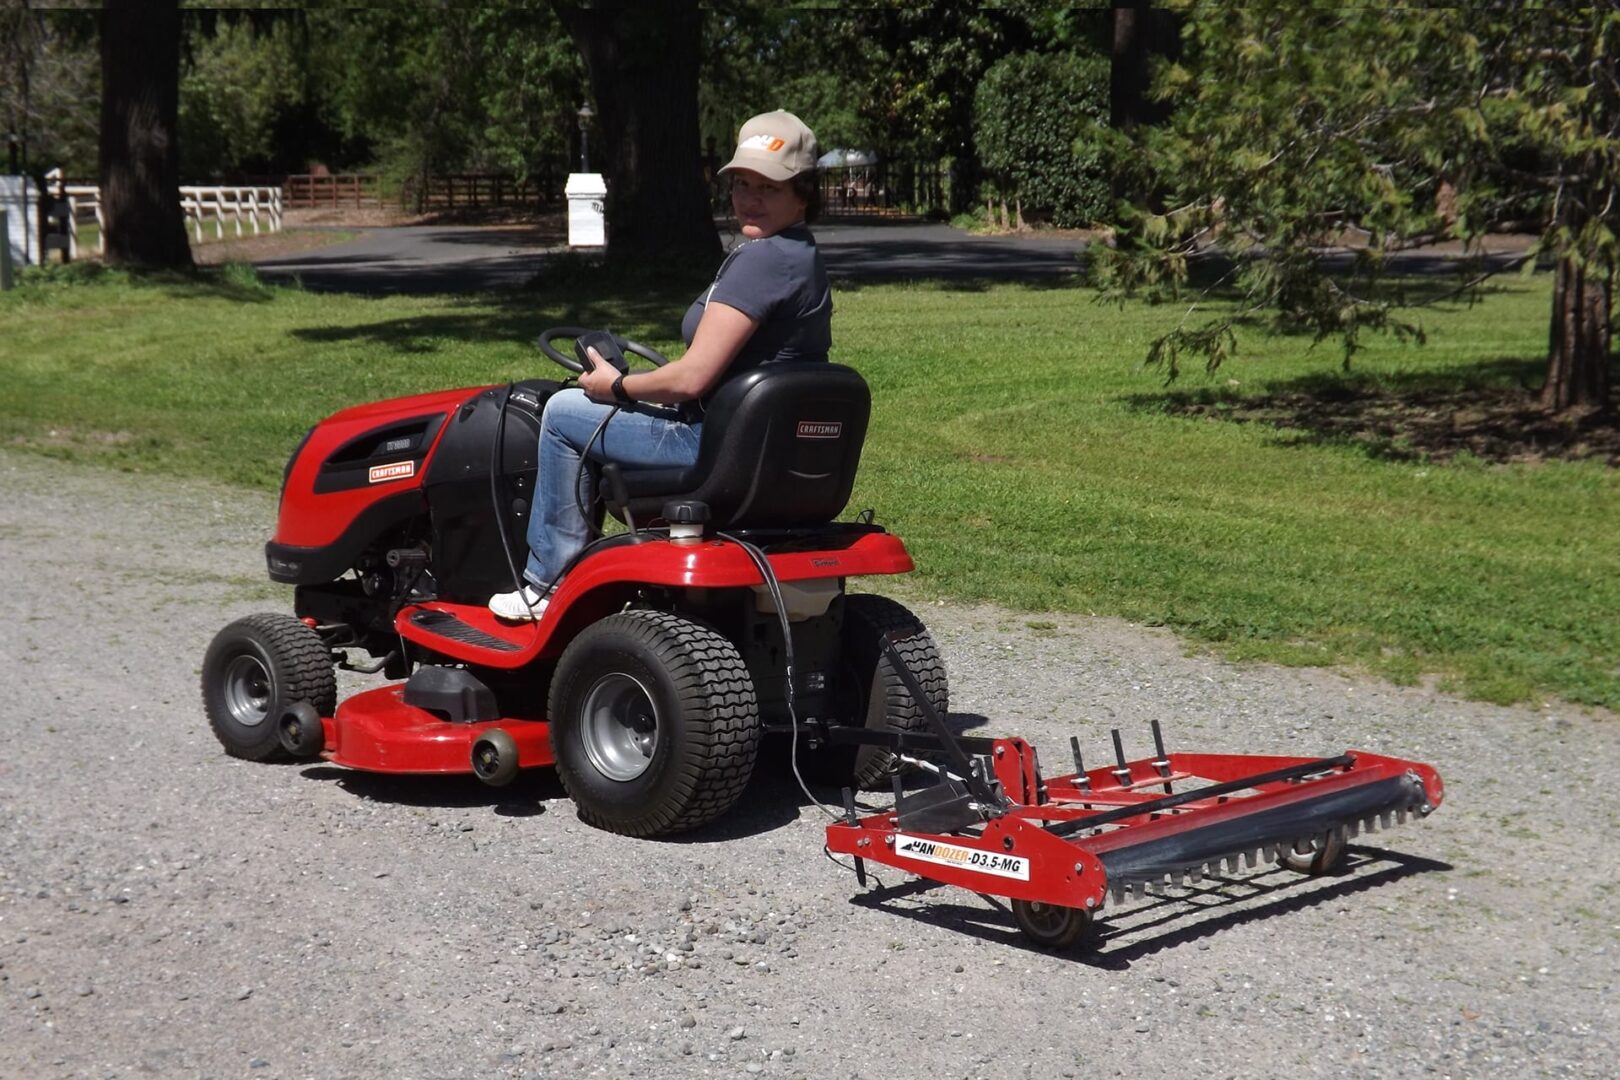 A woman riding a lawn mower with a leveling drag